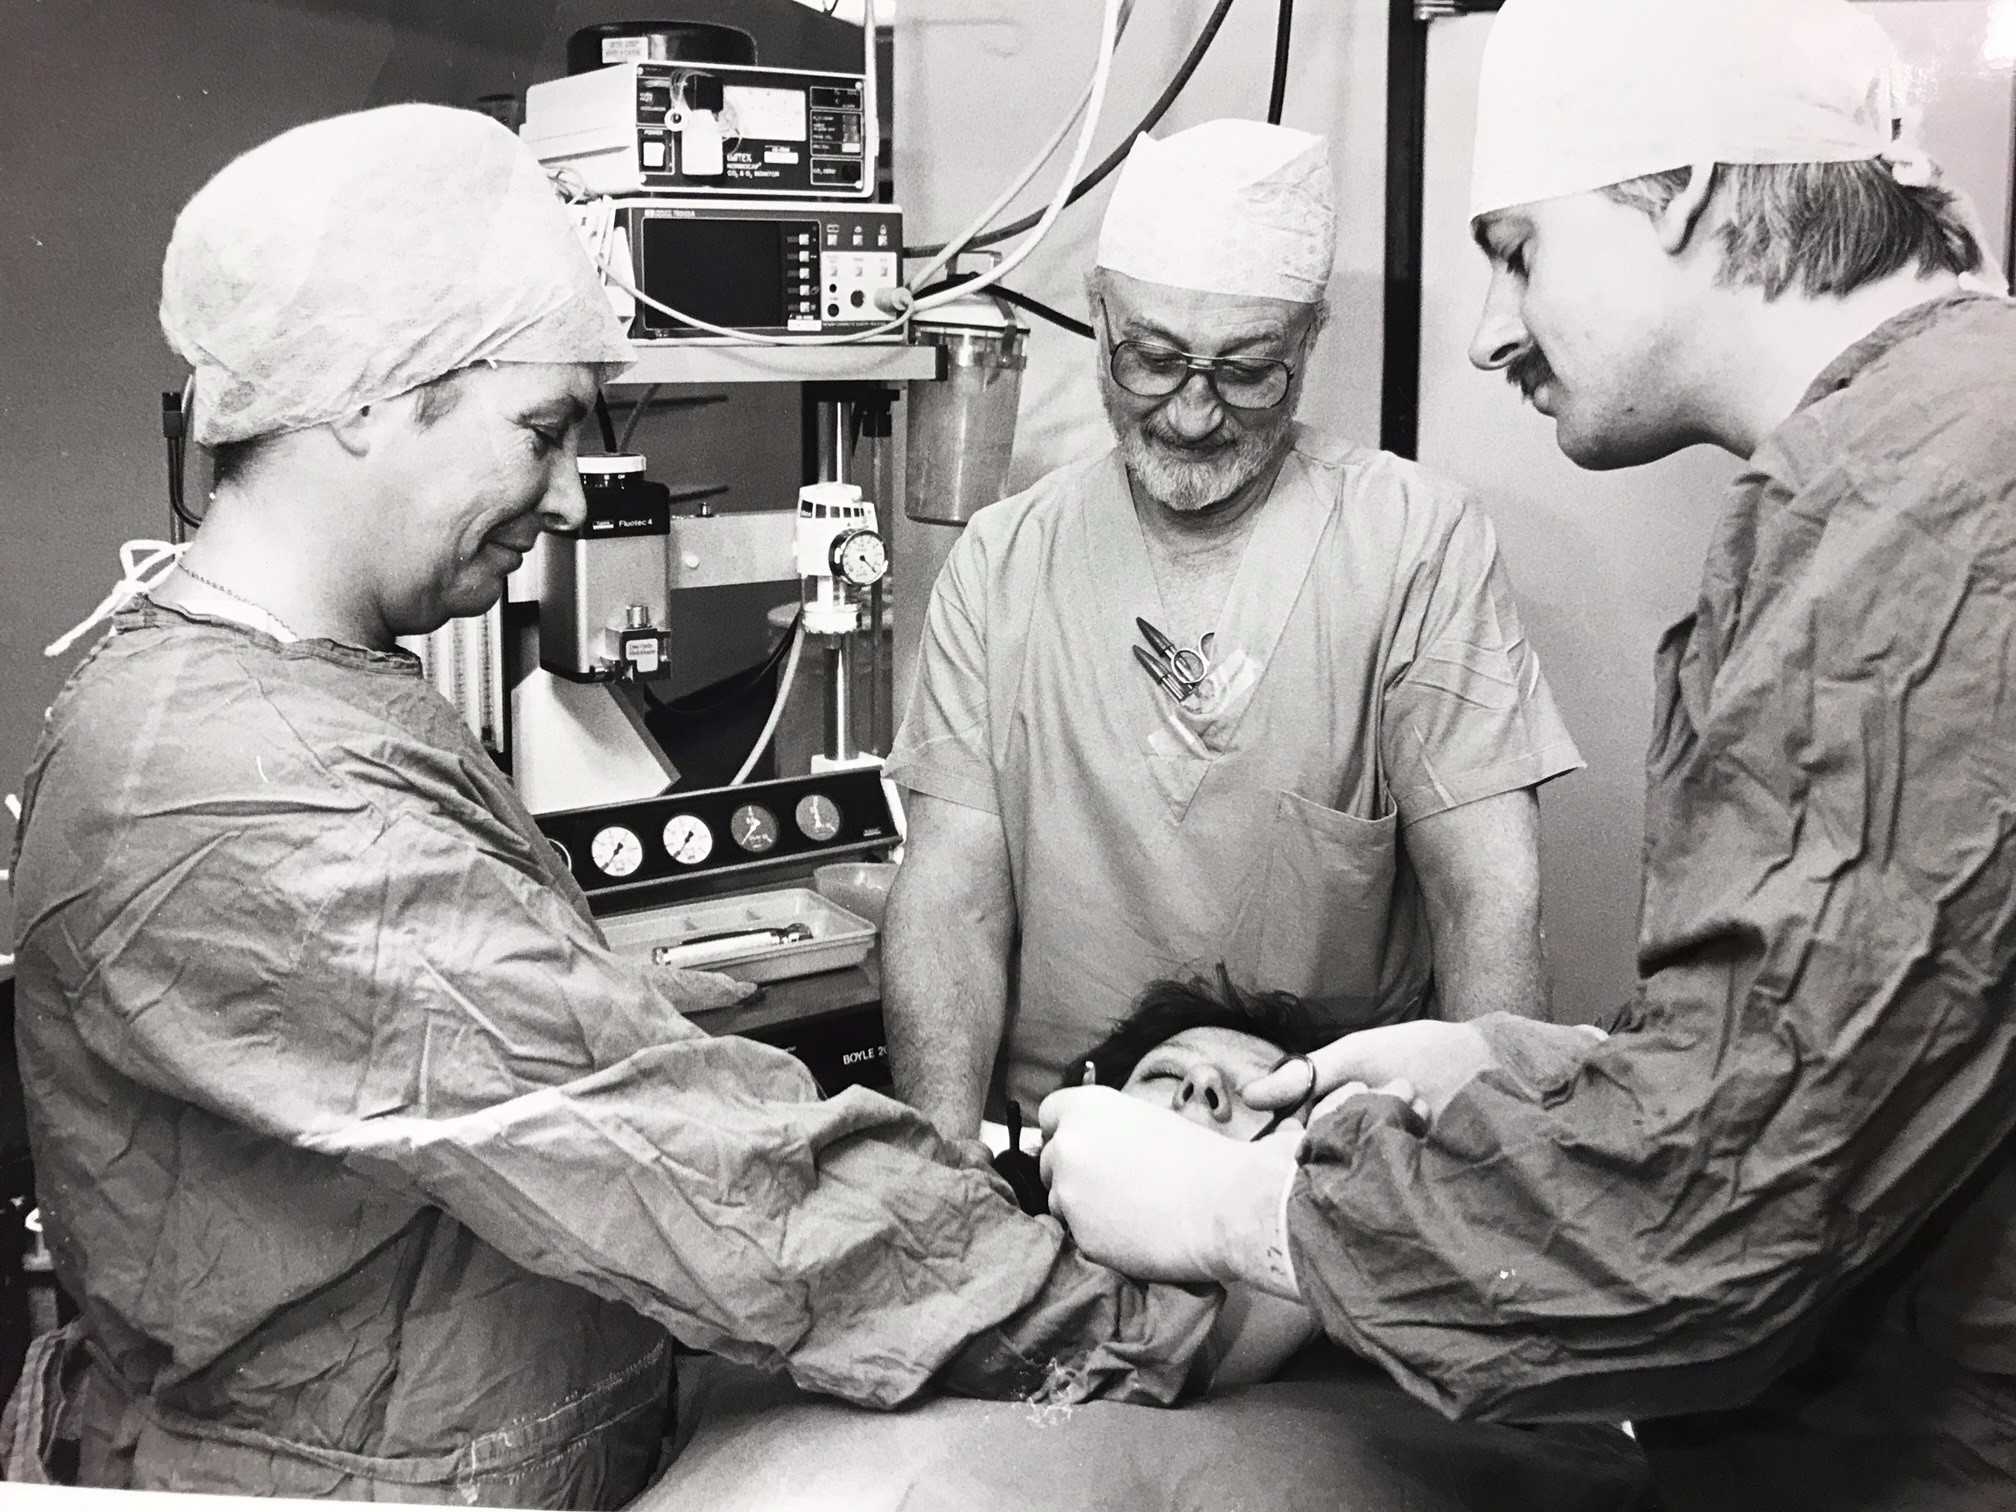 Surgery - surgical teams with a patient at the hospital in October 1988